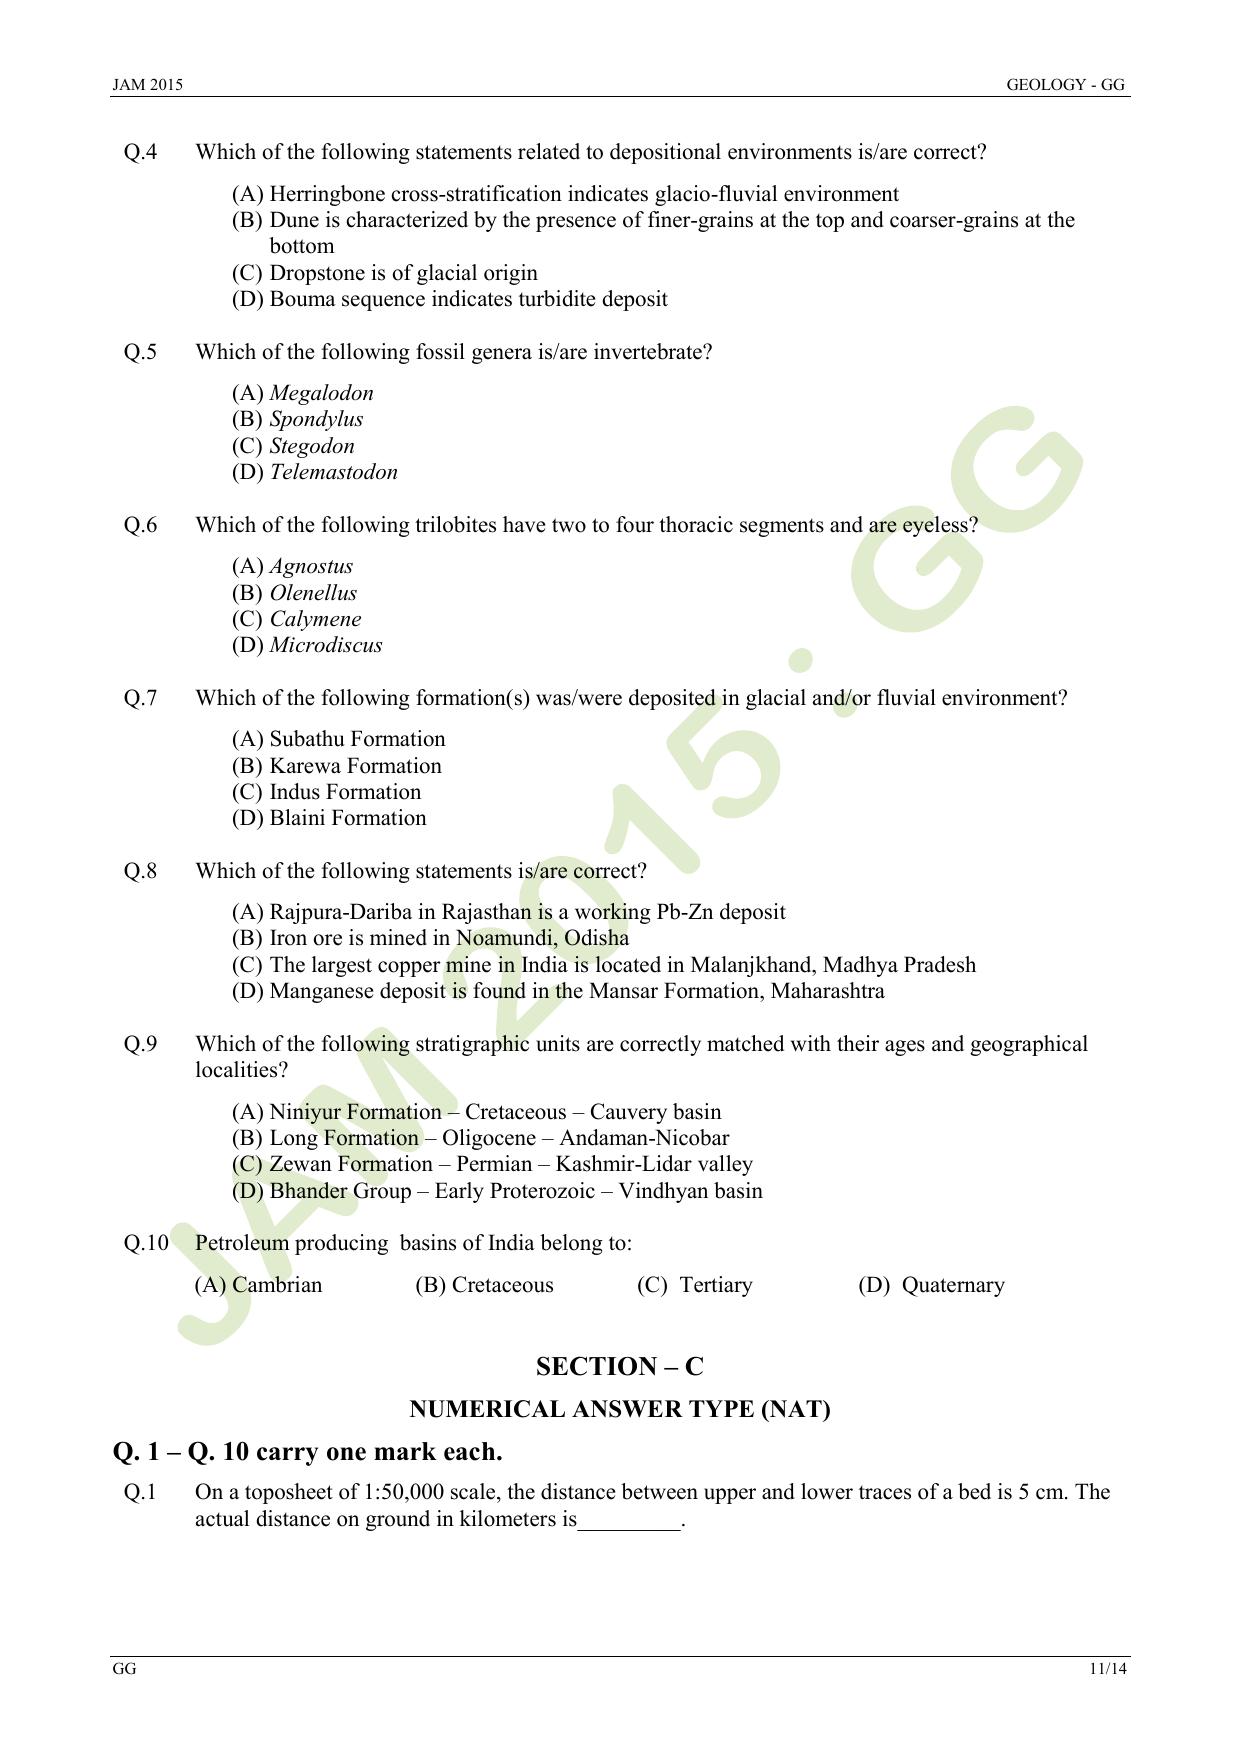 JAM 2015: GG Question Paper - Page 11